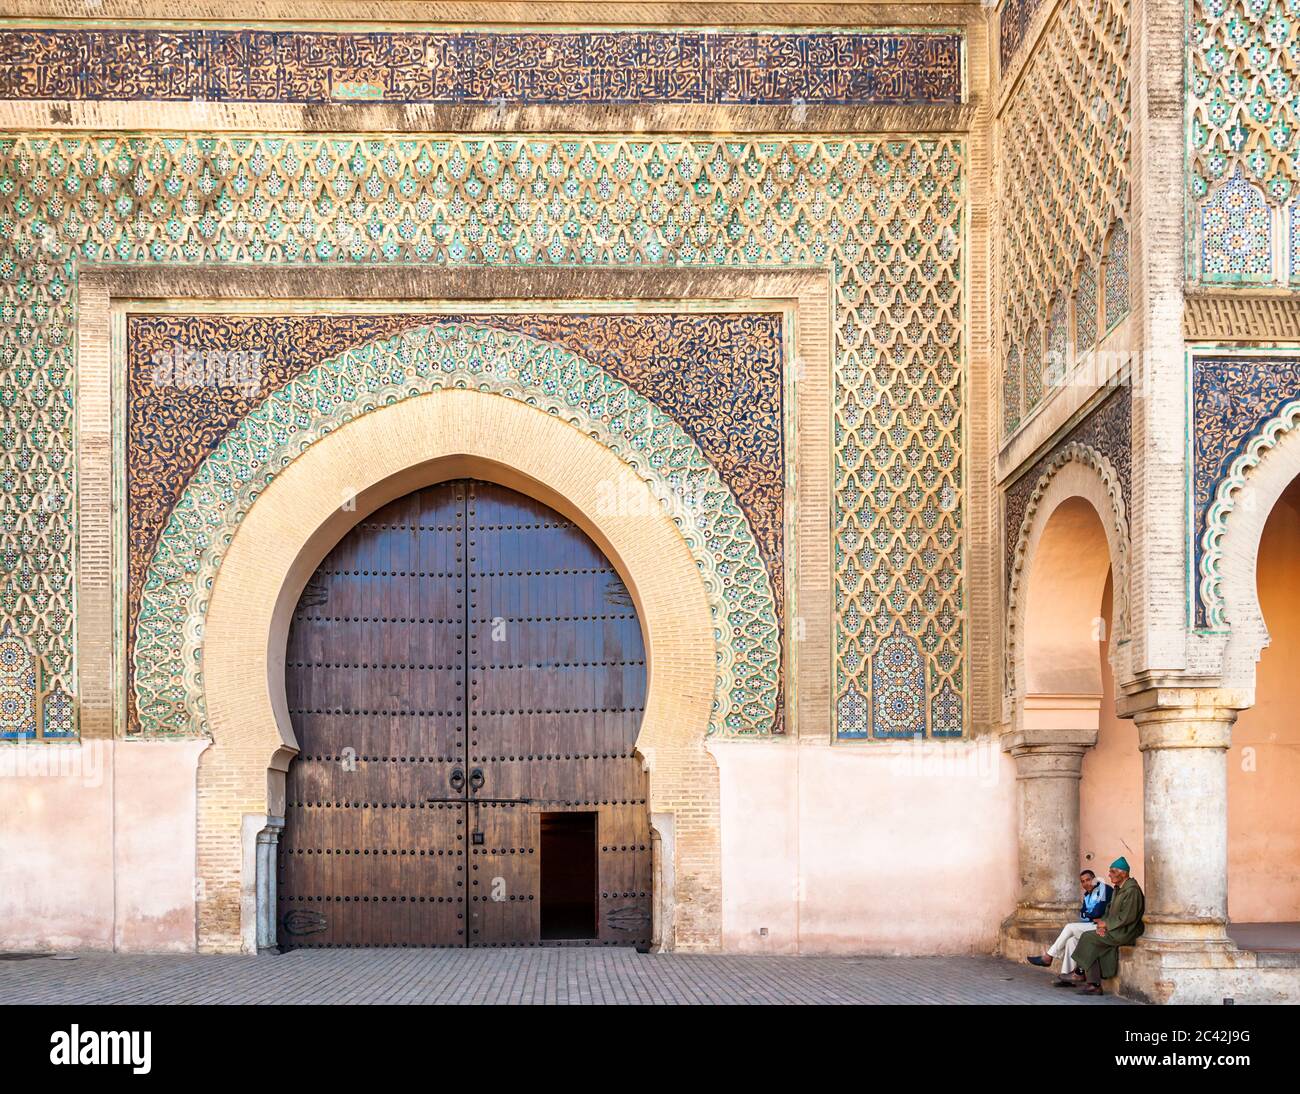 The Bab Mansour city gate of Meknes, Morocco Stock Photo